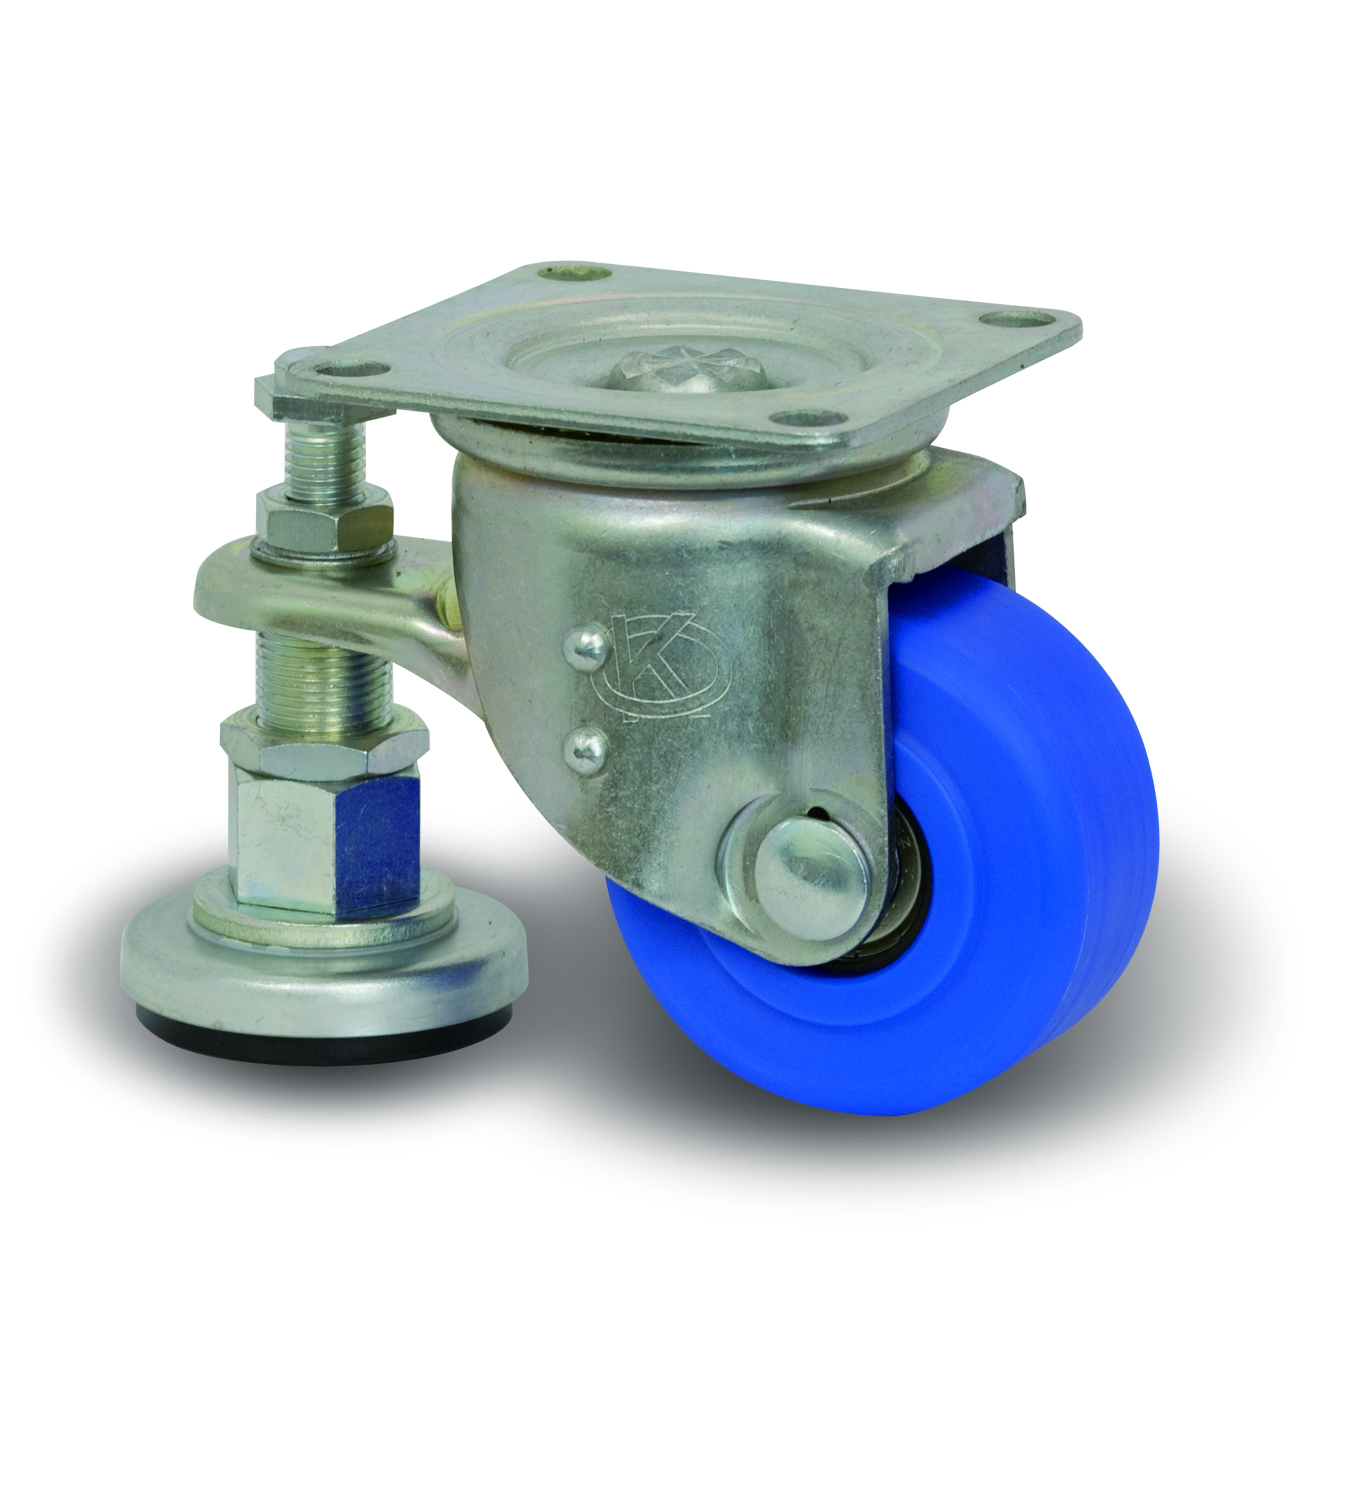 Casters - MC nylon with integrated leveler, L-JW, L-MCB/JW series (For small heavy load).